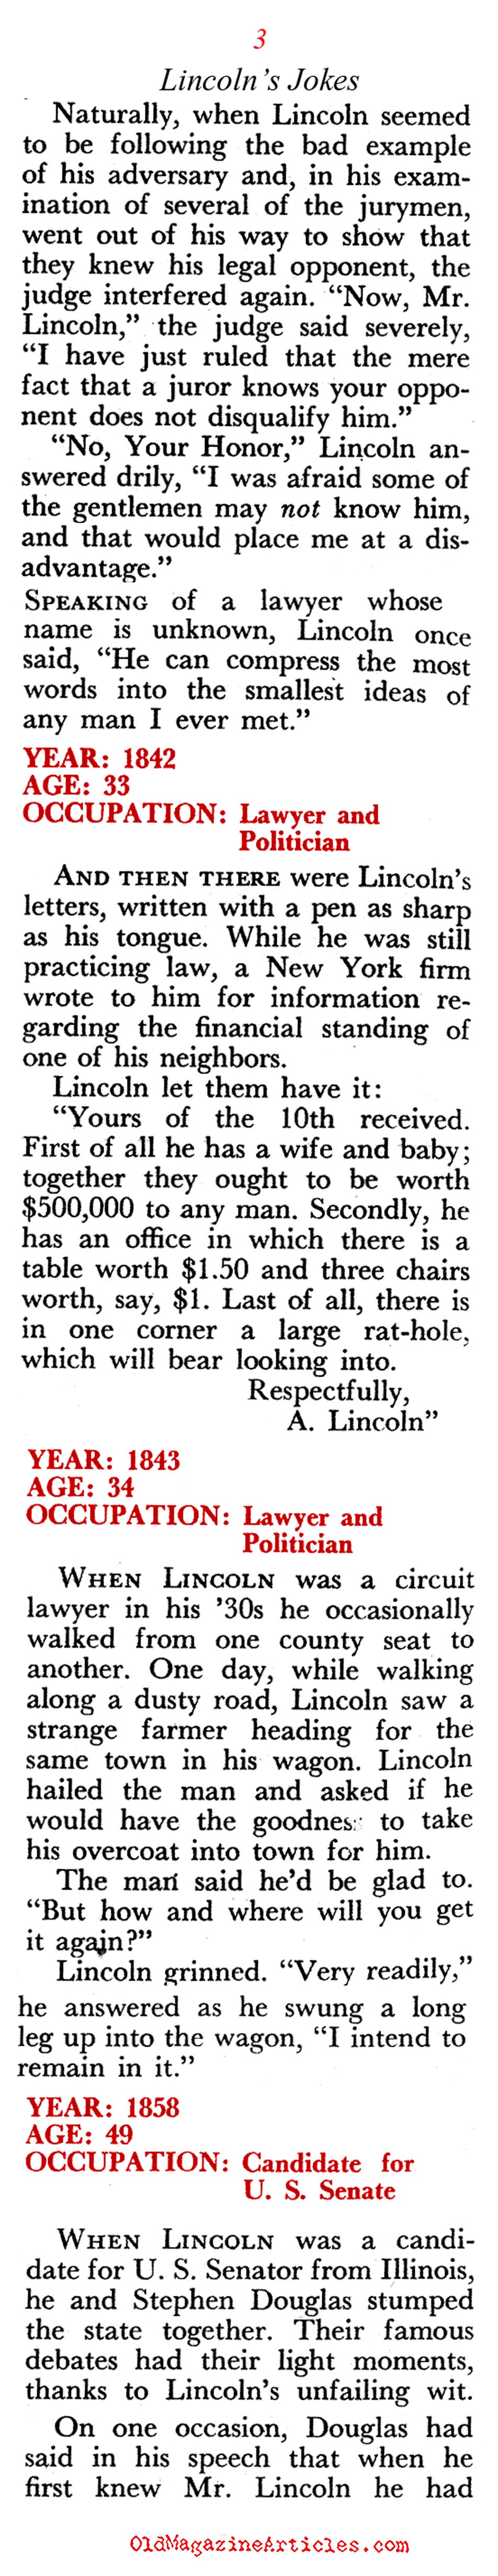 The Jokes of Abraham Lincoln (Pageant Magazine, 1954)